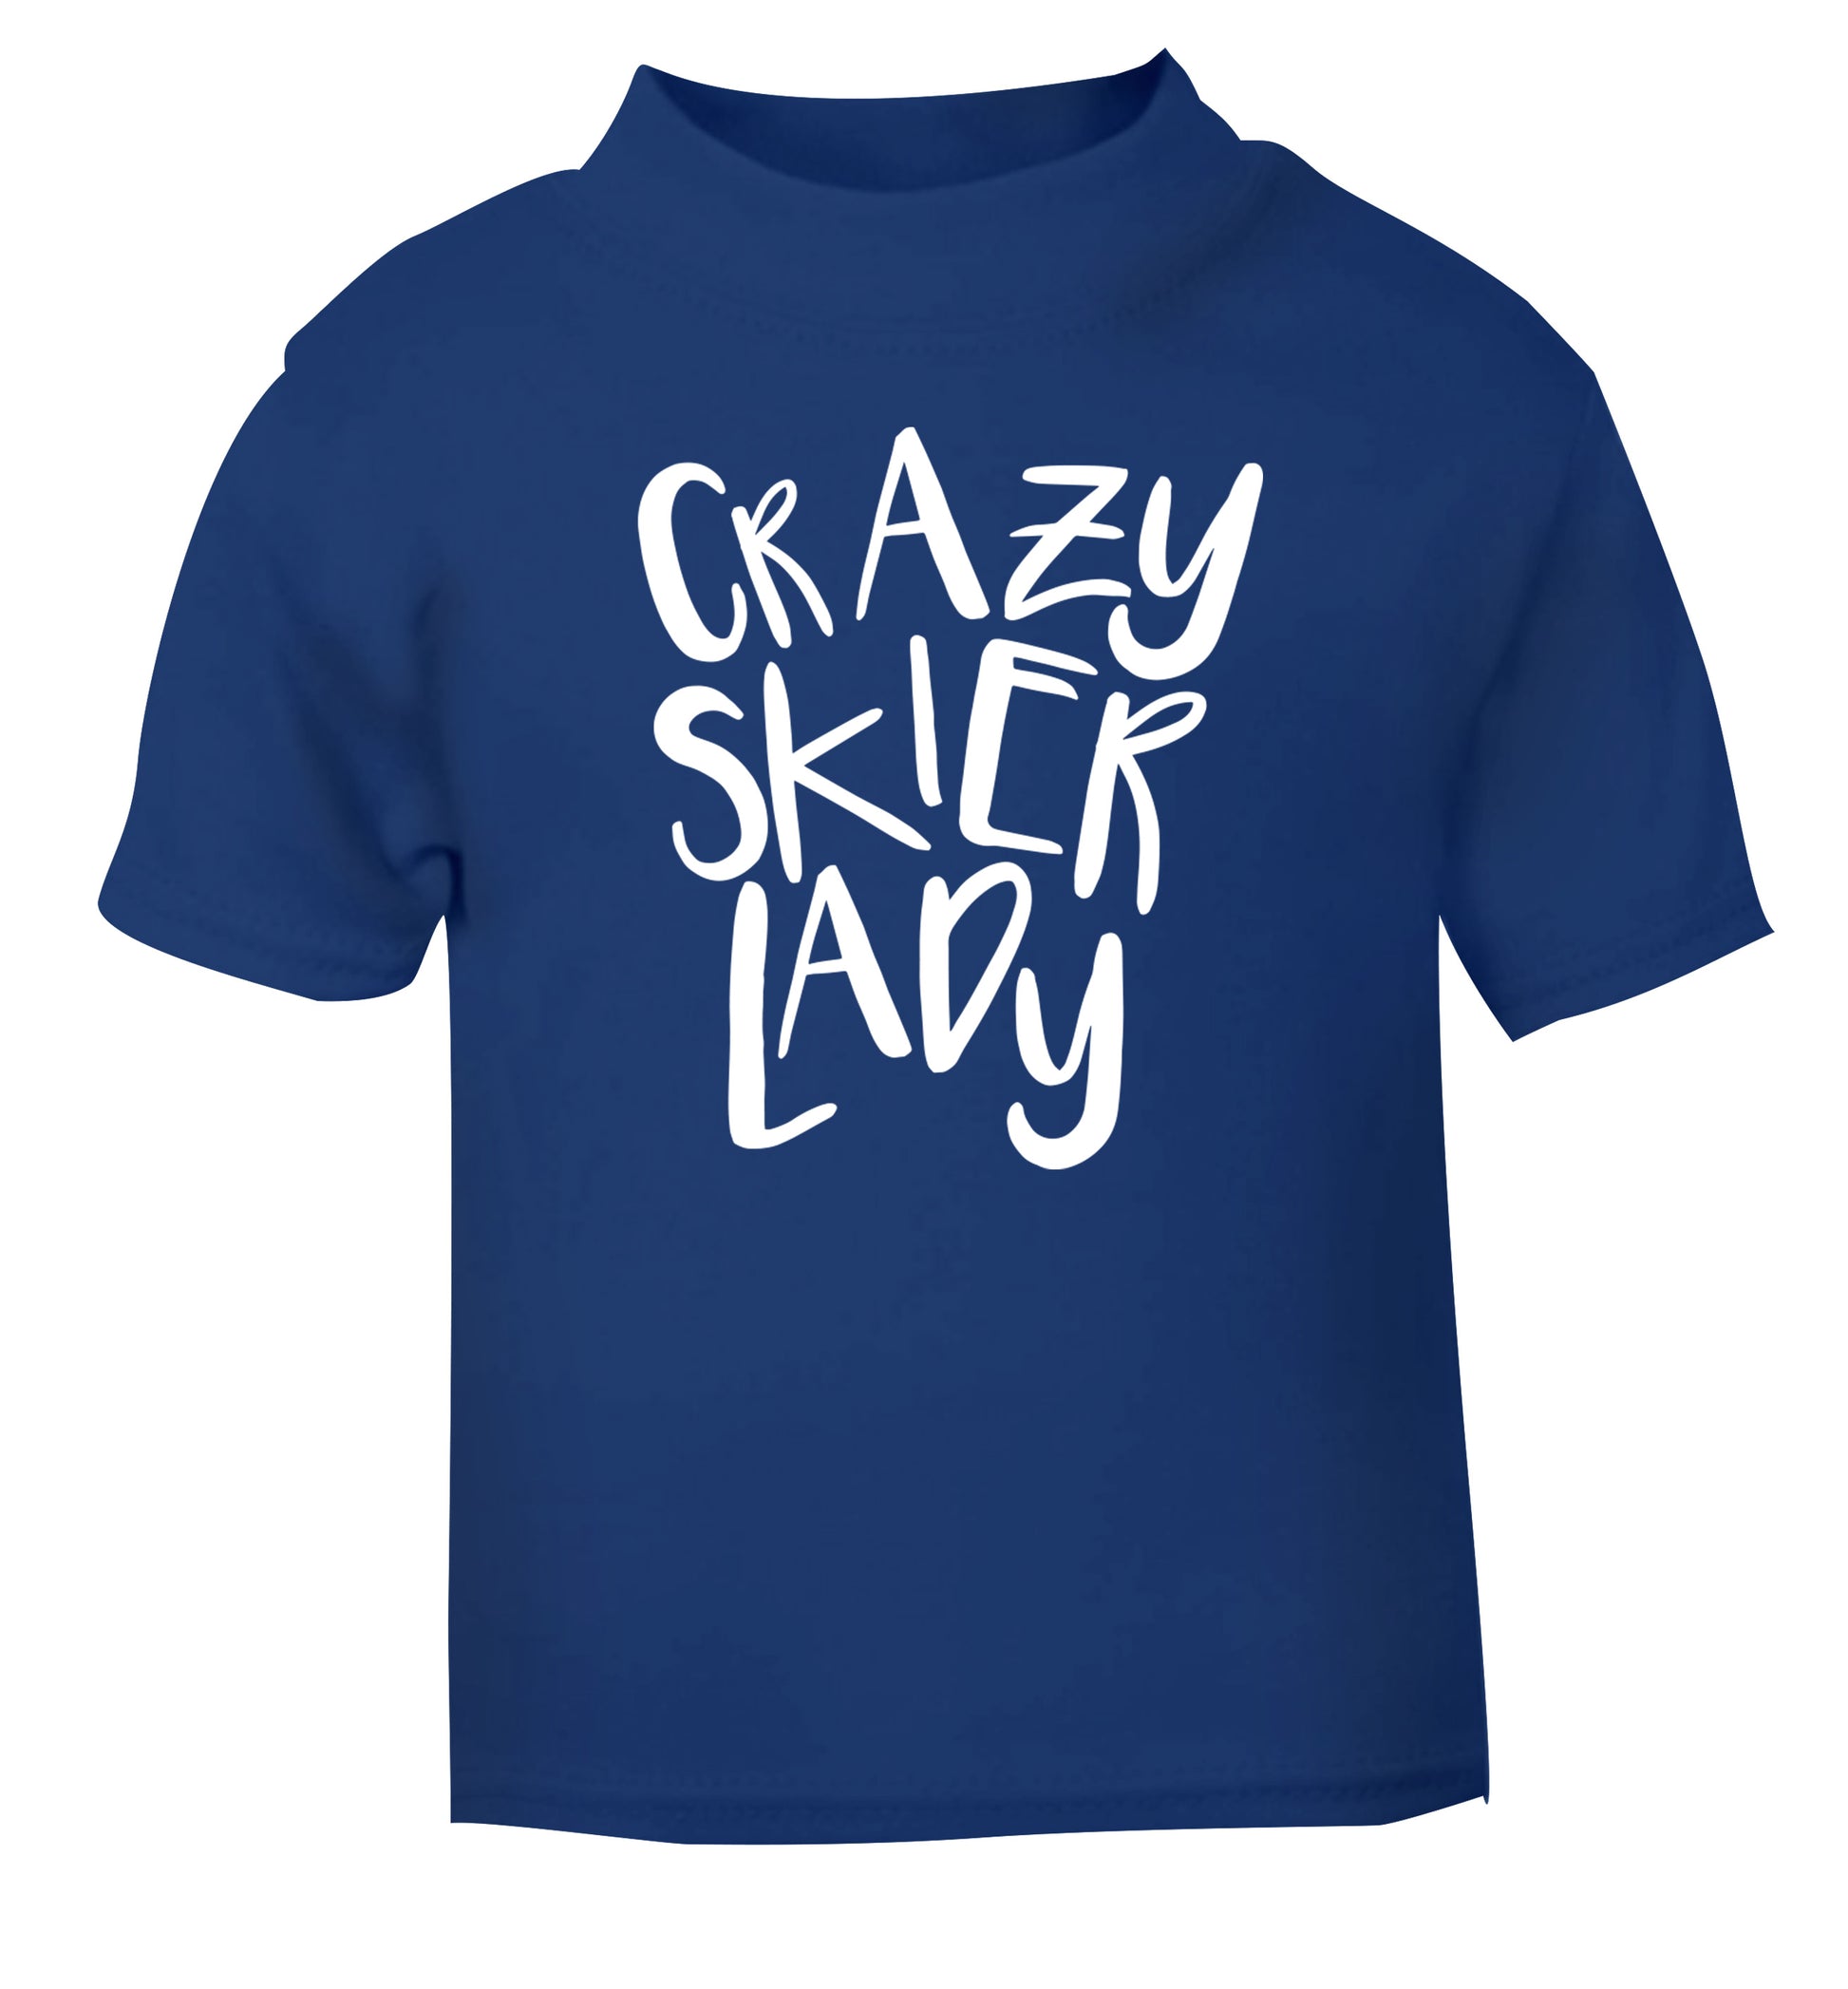 Crazy skier lady blue Baby Toddler Tshirt 2 Years